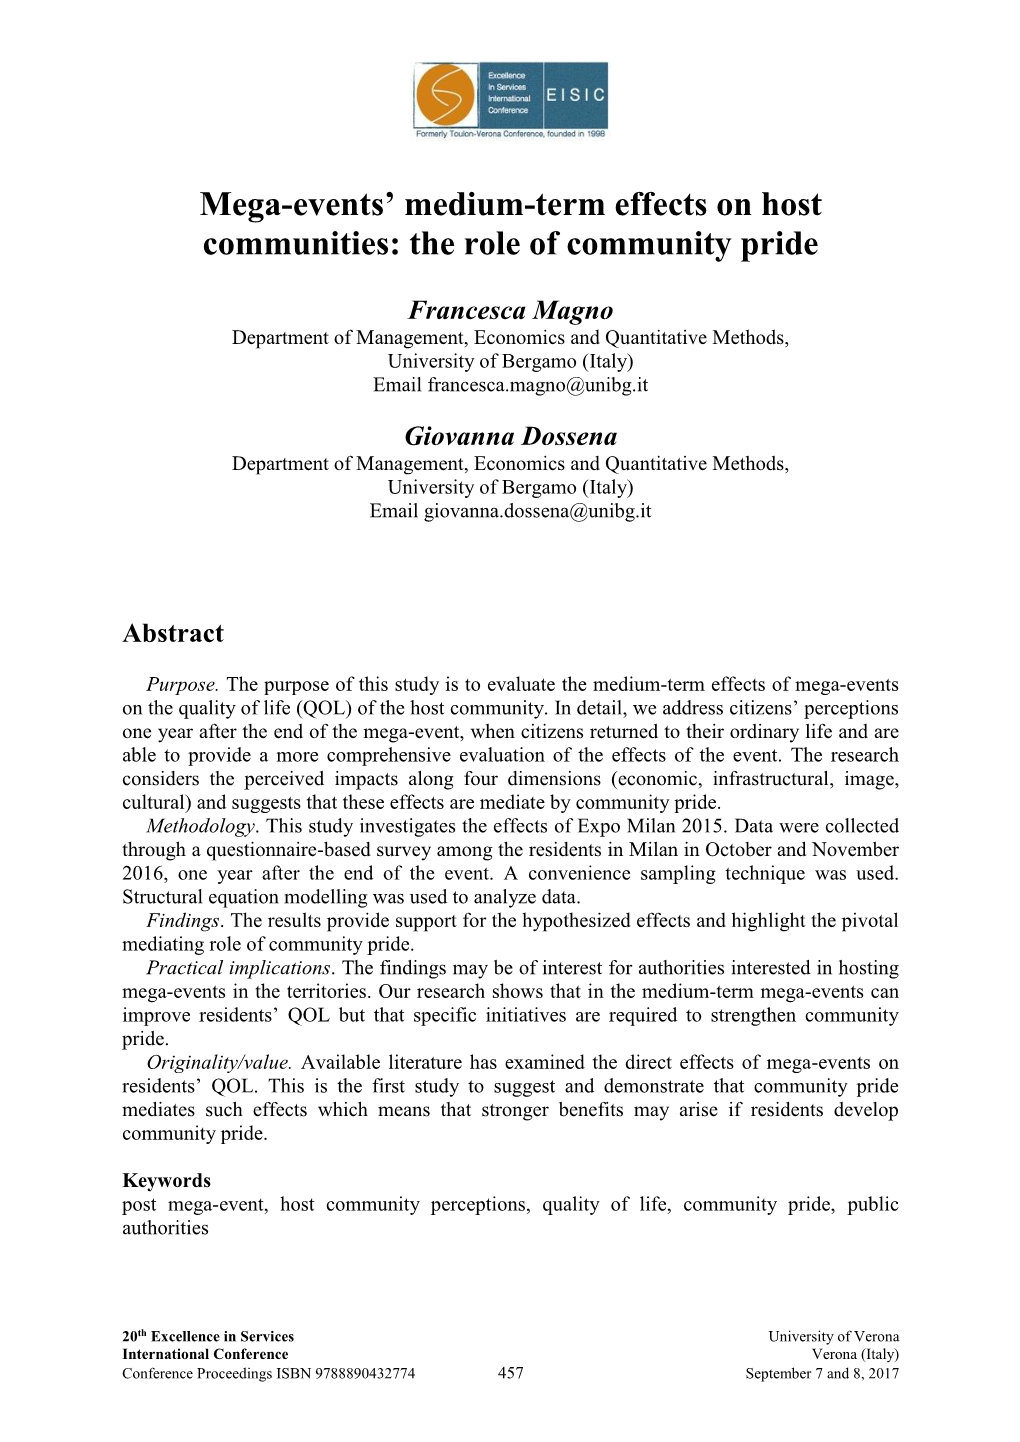 Mega-Events' Medium-Term Effects on Host Communities: the Role Of